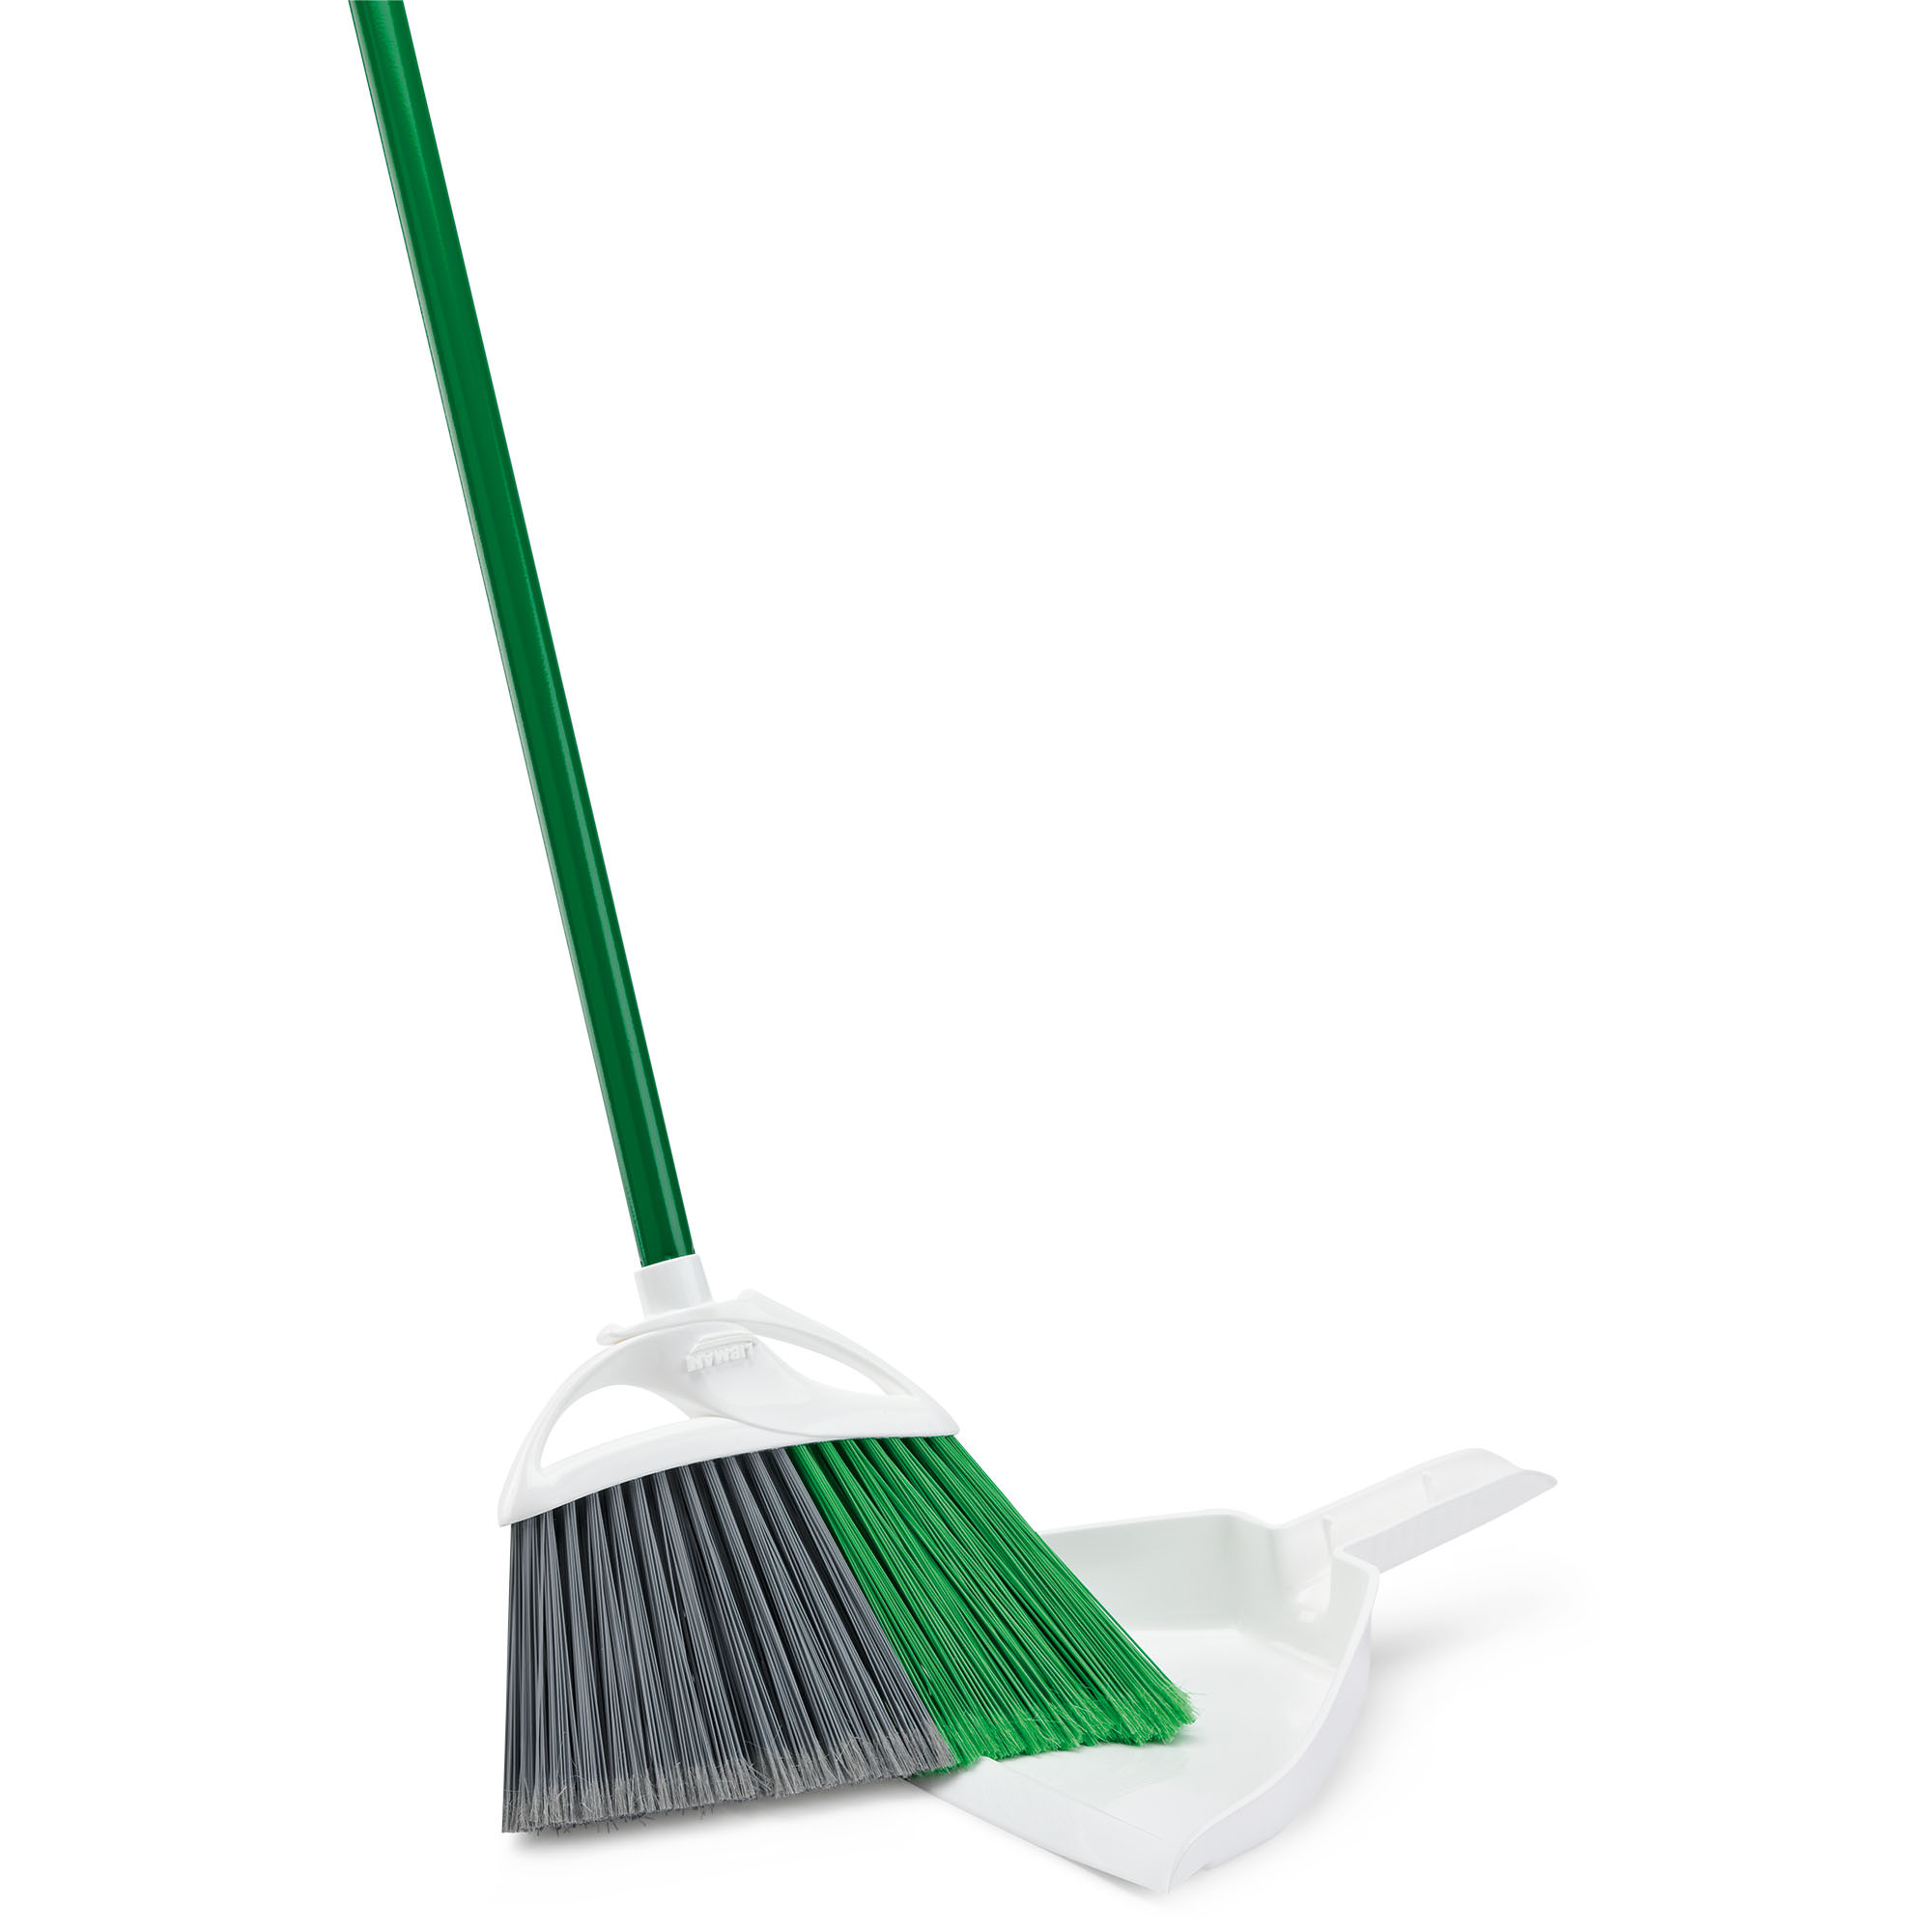 Libman Precision Angle Broom with Dust Pan Green White - image 4 of 7